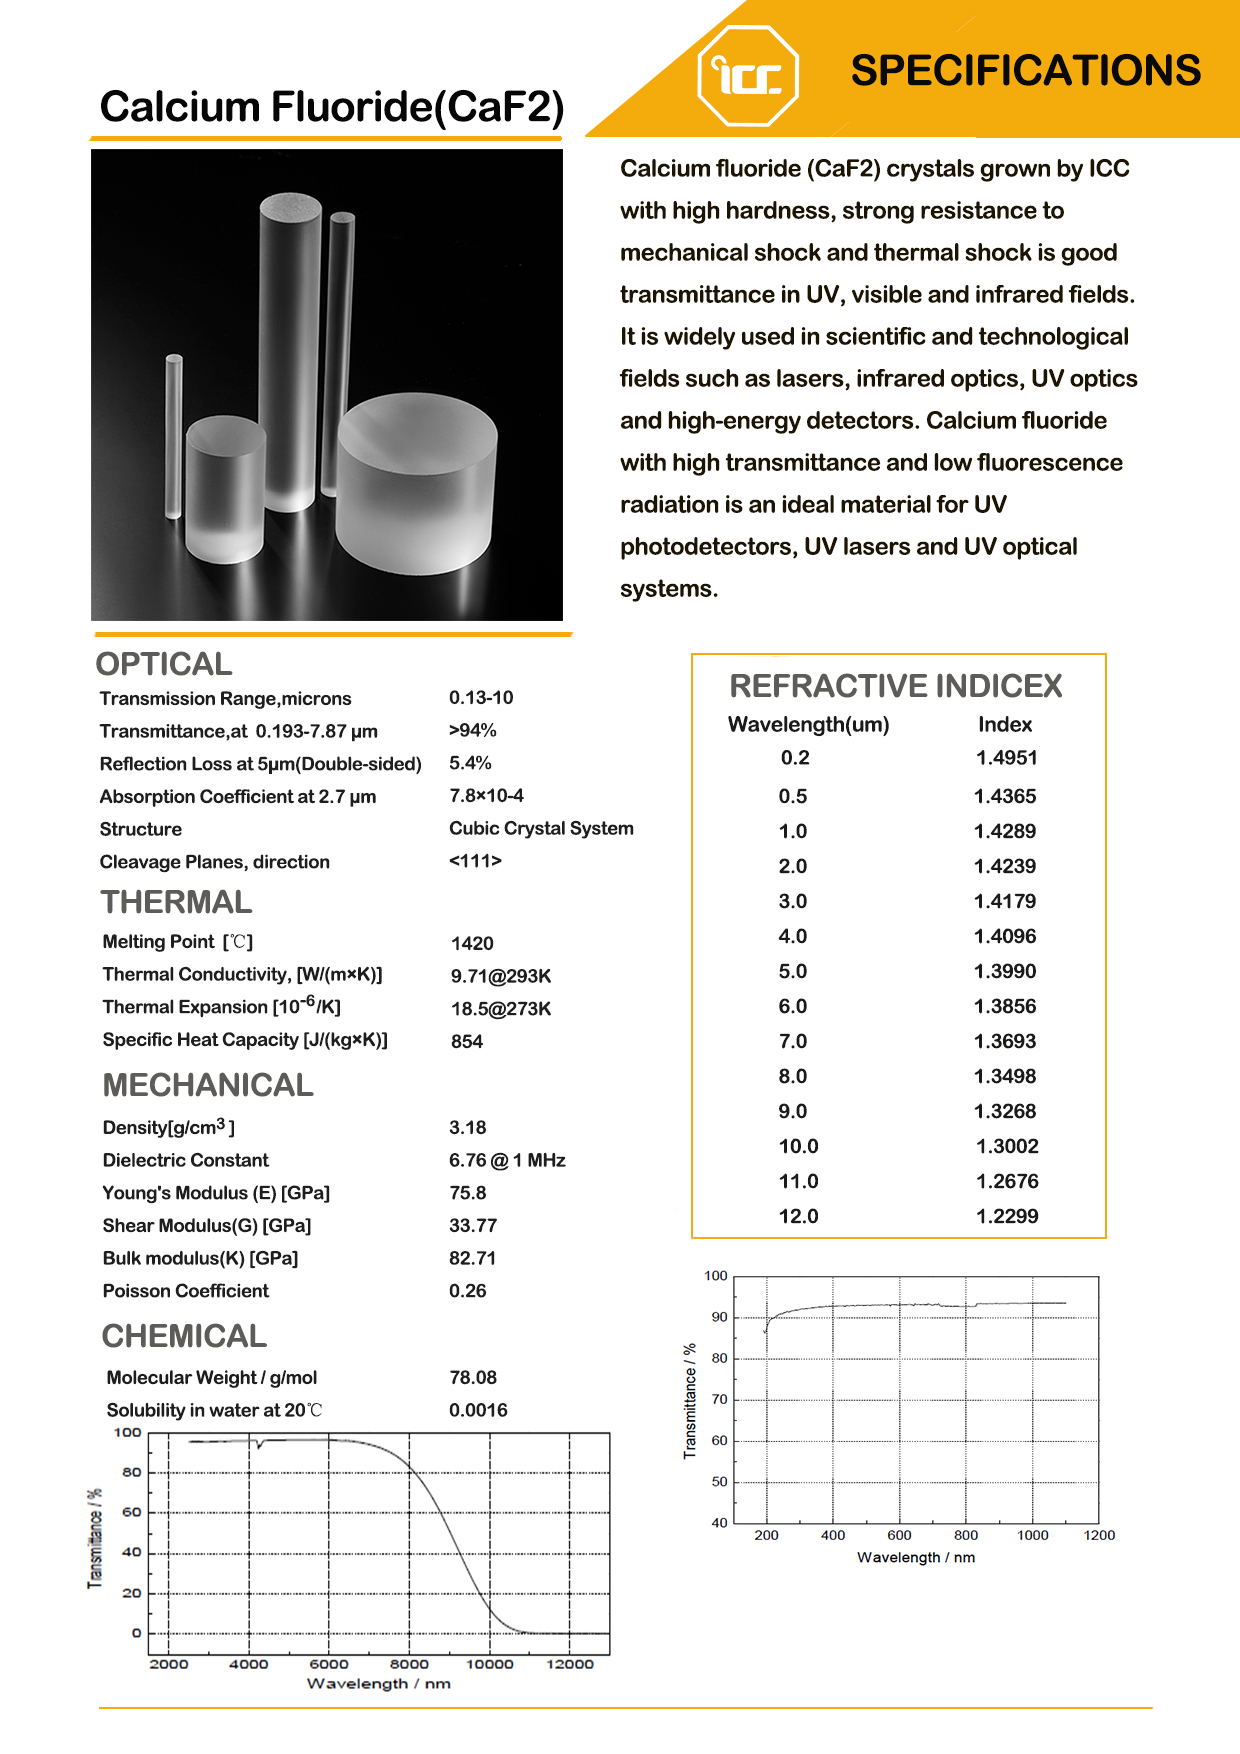 Calcium fluoride PCX cylindrical lenses material data and transmittance curves